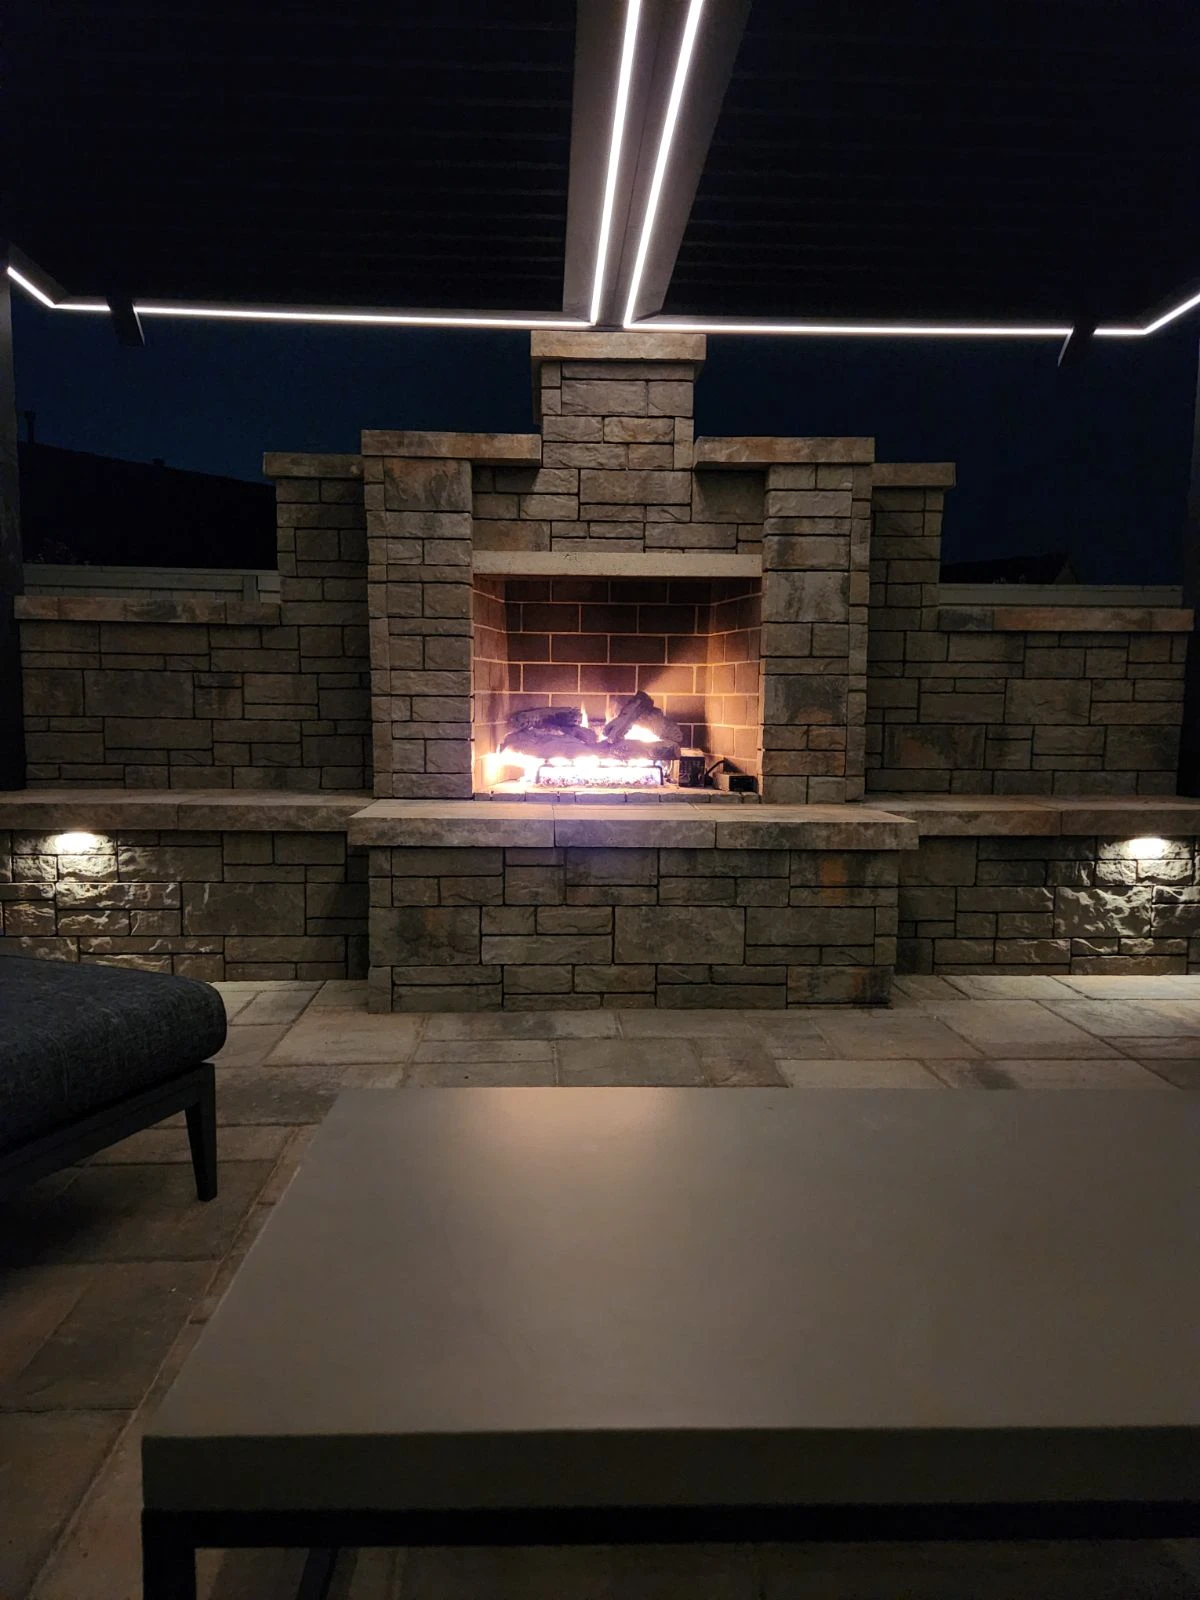 Outdoor living area night scene with fireplace